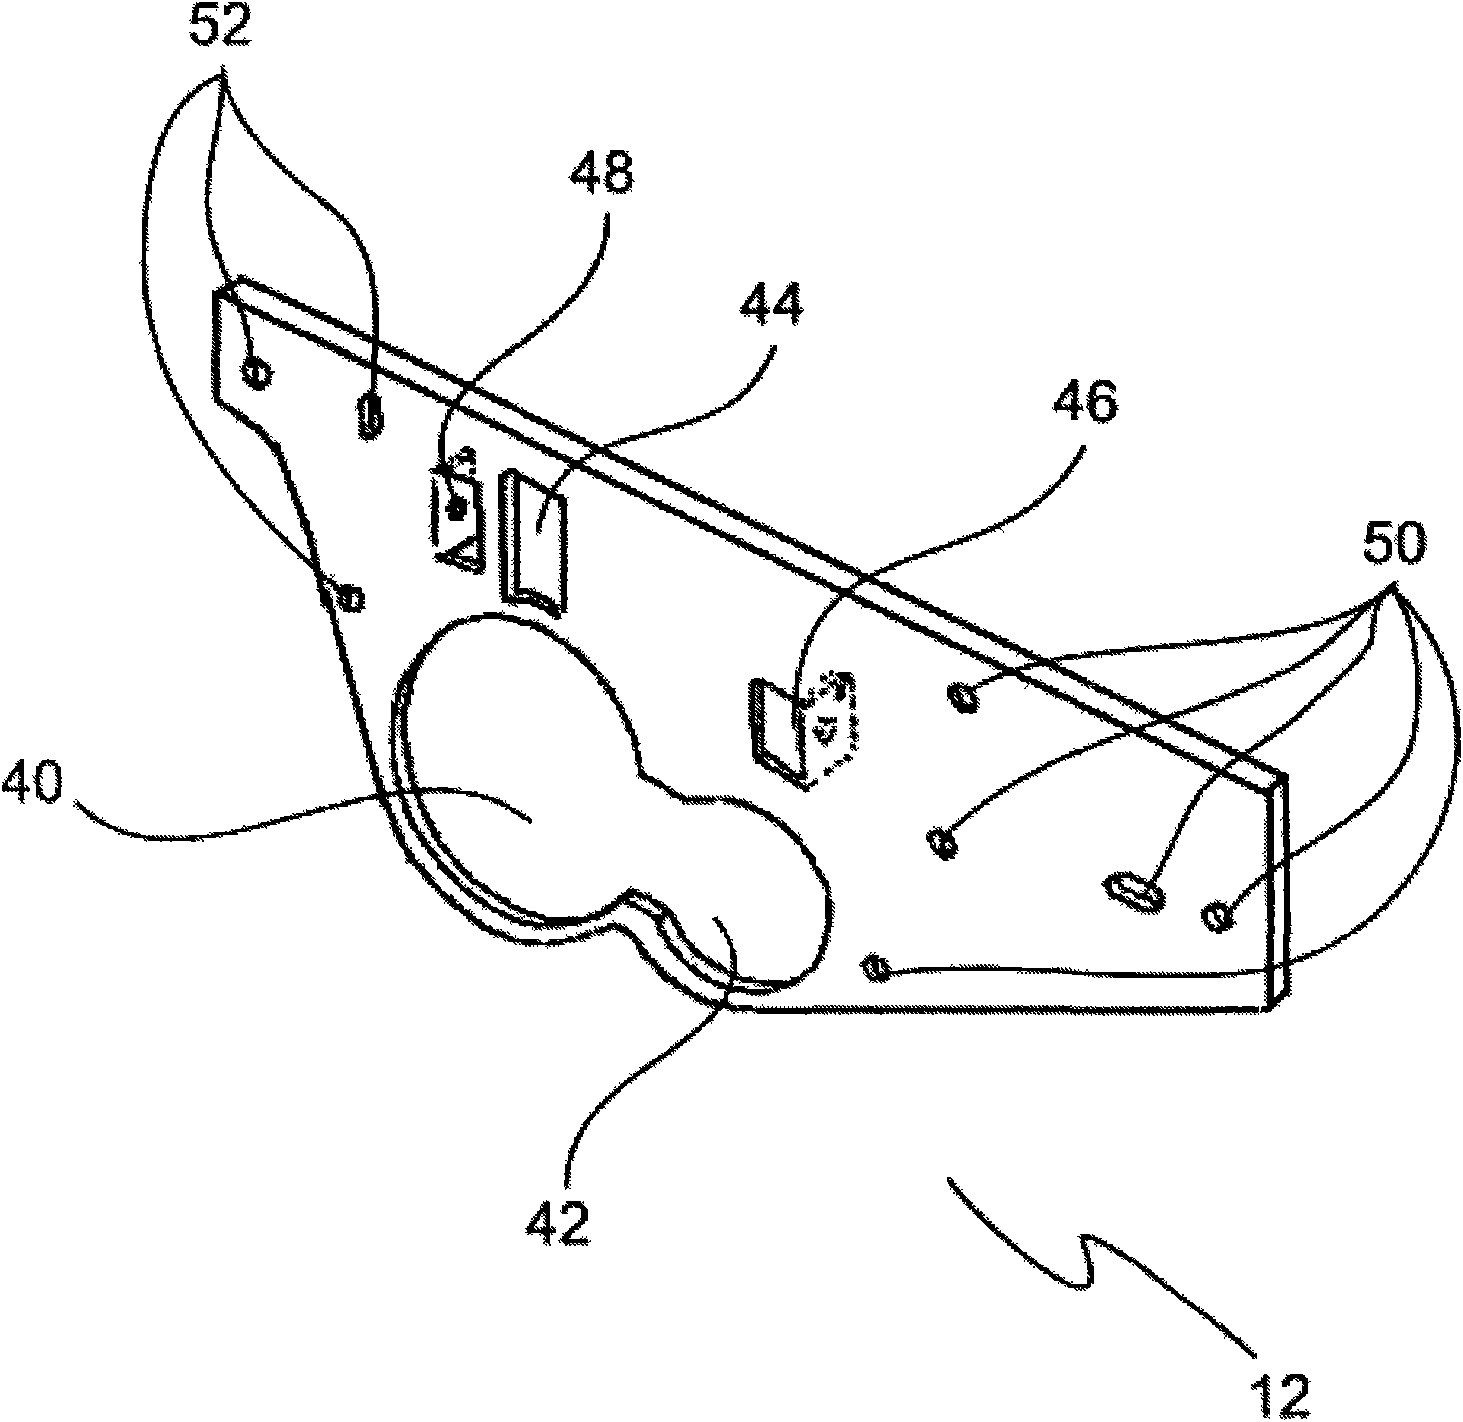 Process cartridge detachably mountable to image forming apparatus